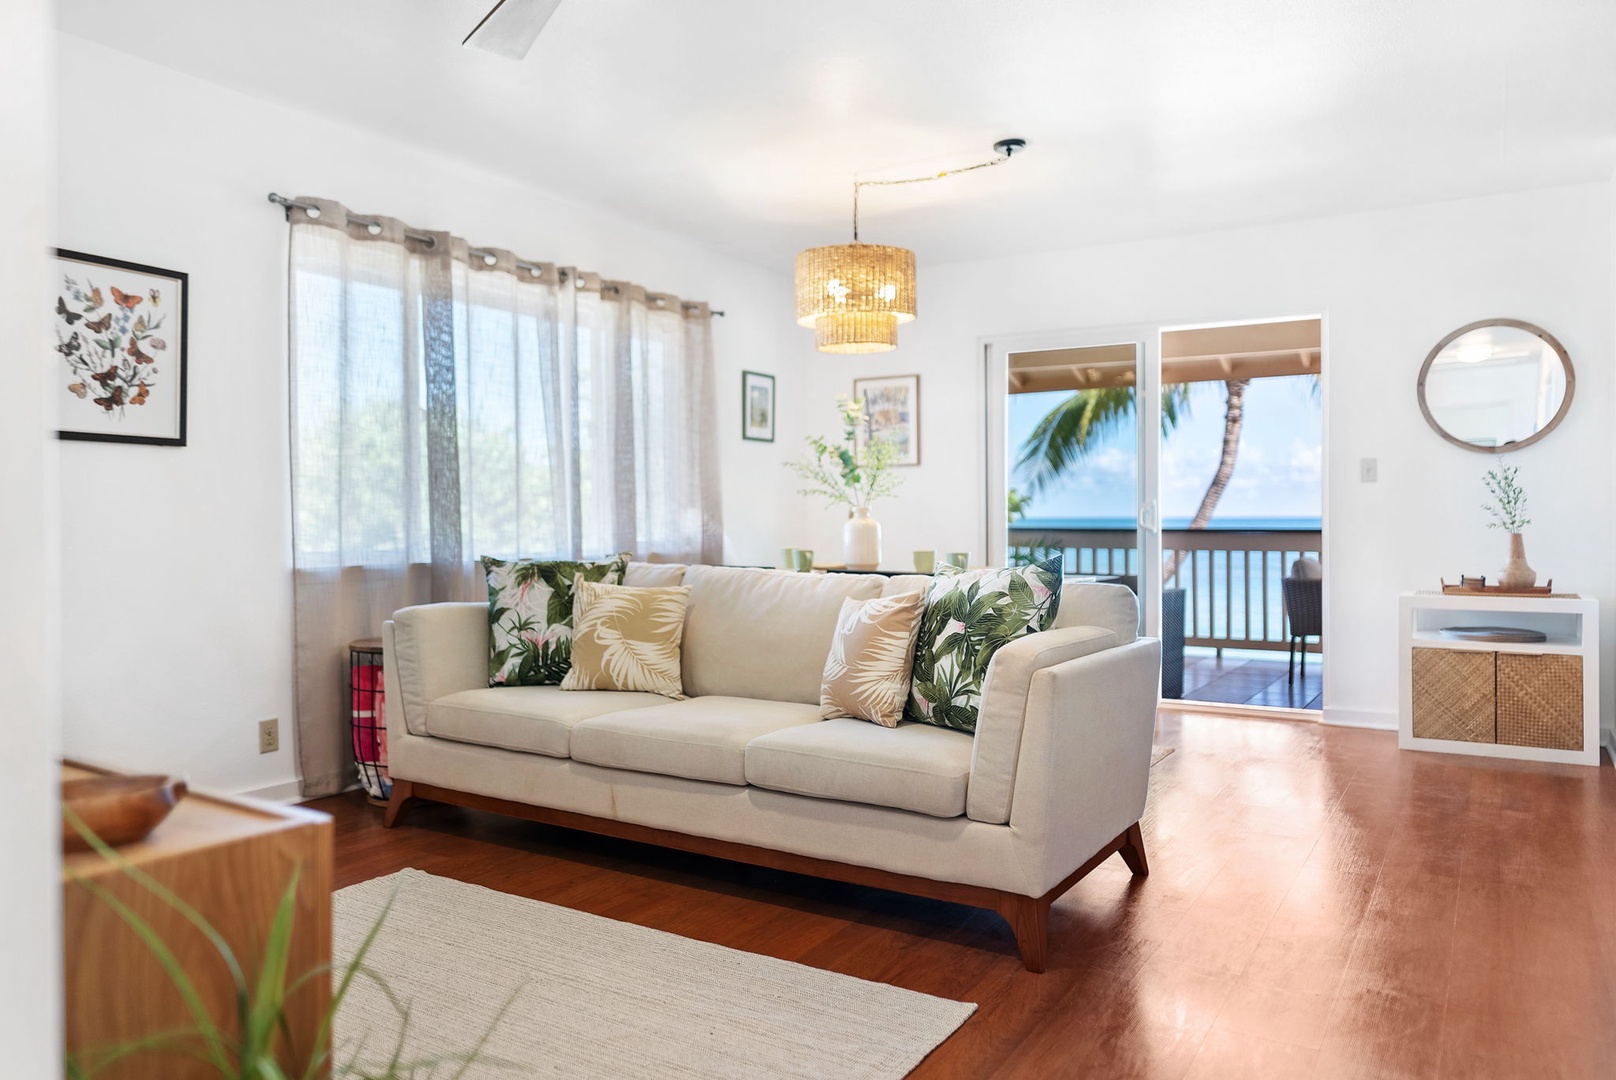 Haleiwa Vacation Rentals, Pikai Hale - The sliding doors behind the sofa lead out to your private lanai with beach views